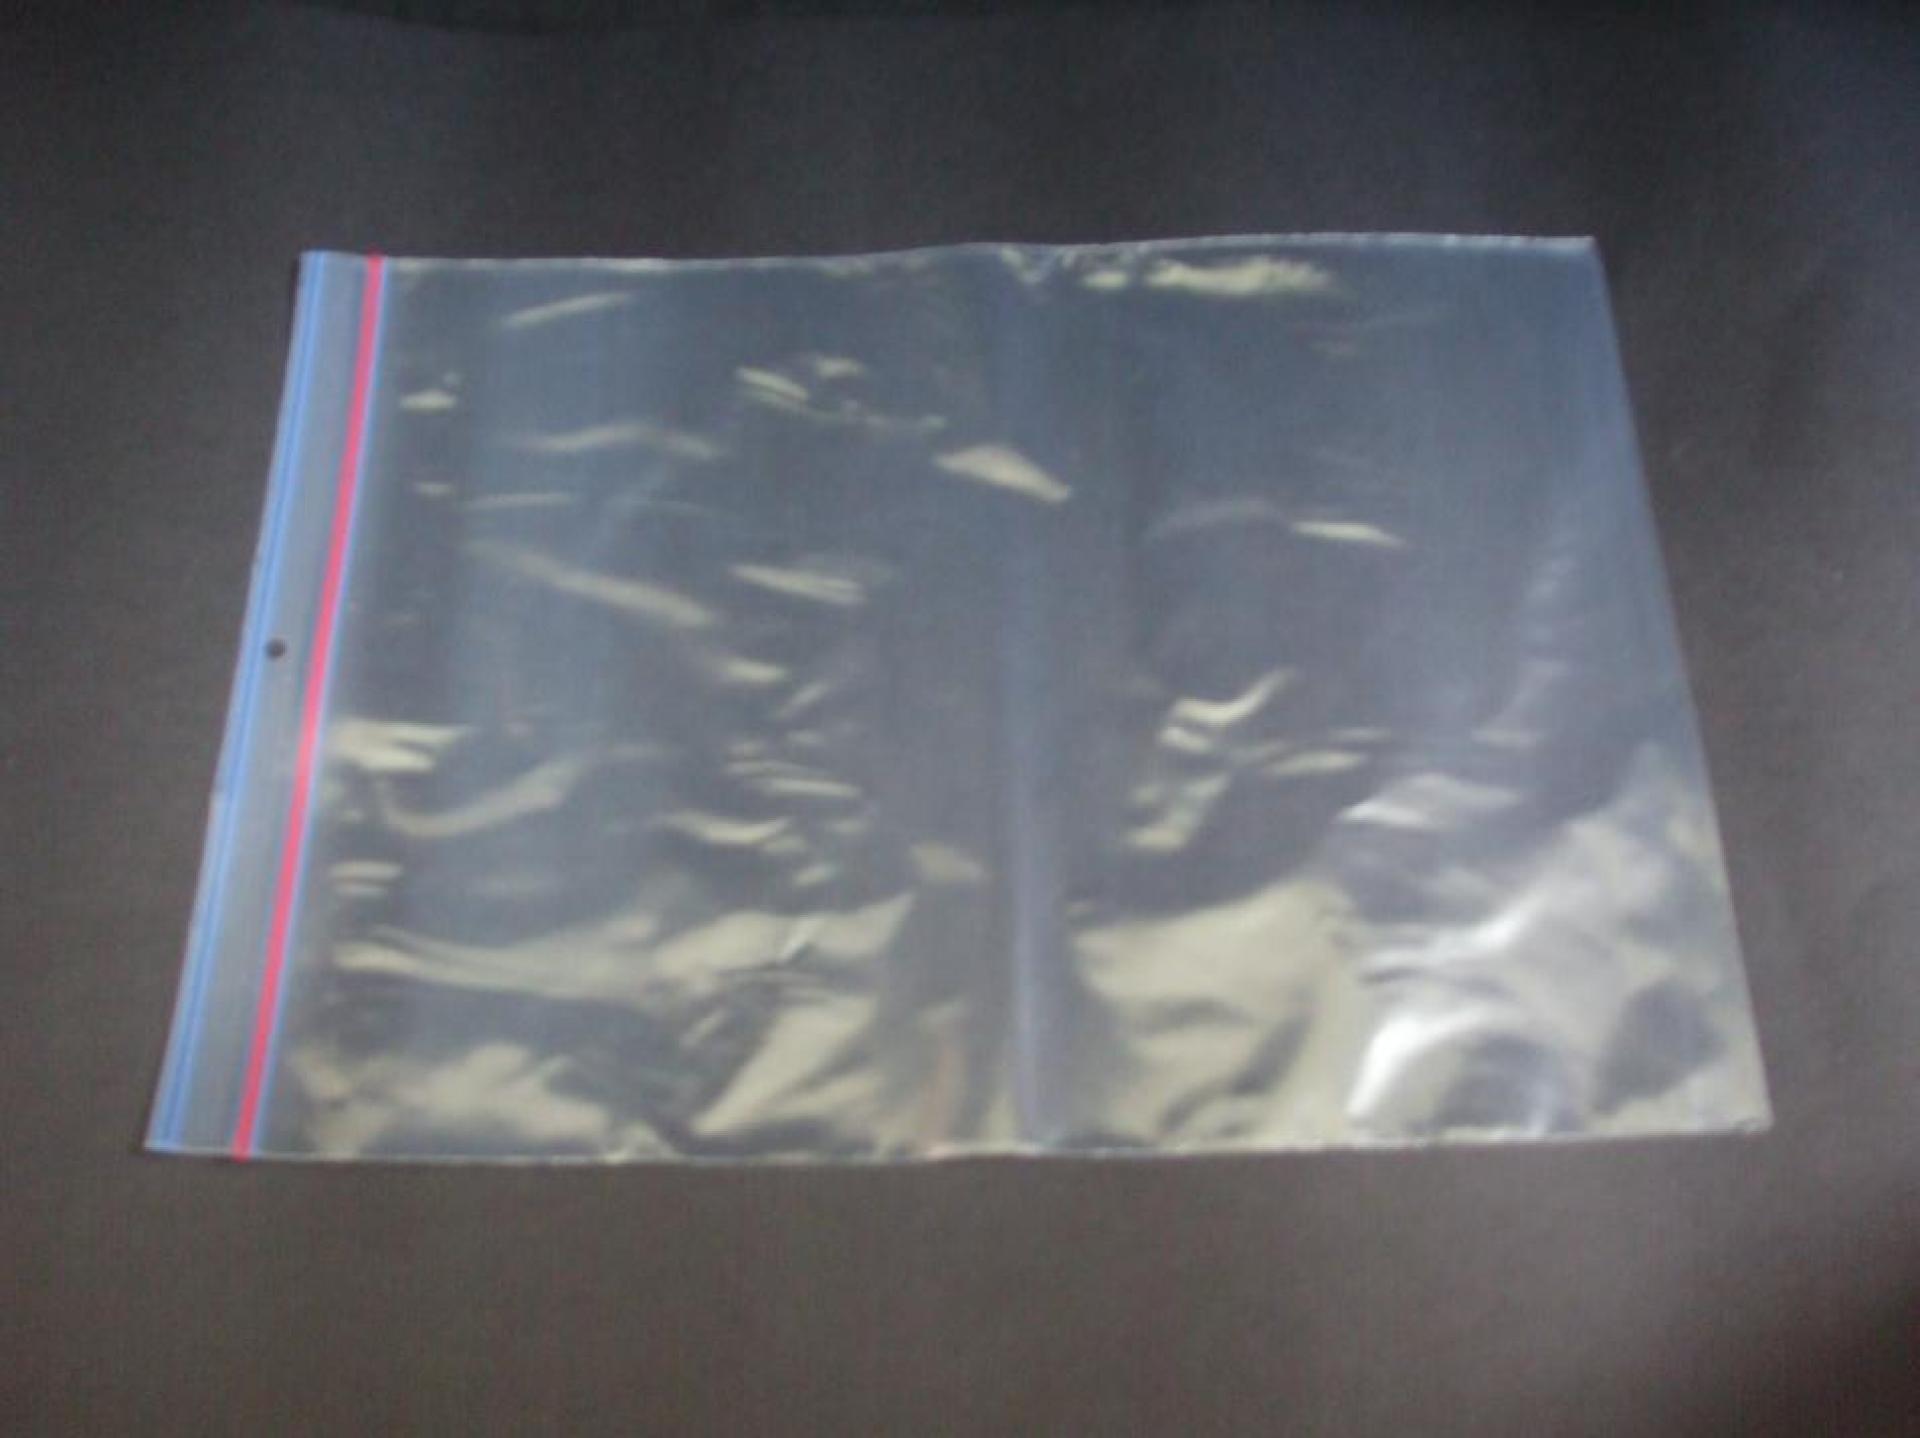 Sealing Plastic Bag For Soiled Dressings - First Aid Courses & Training ...